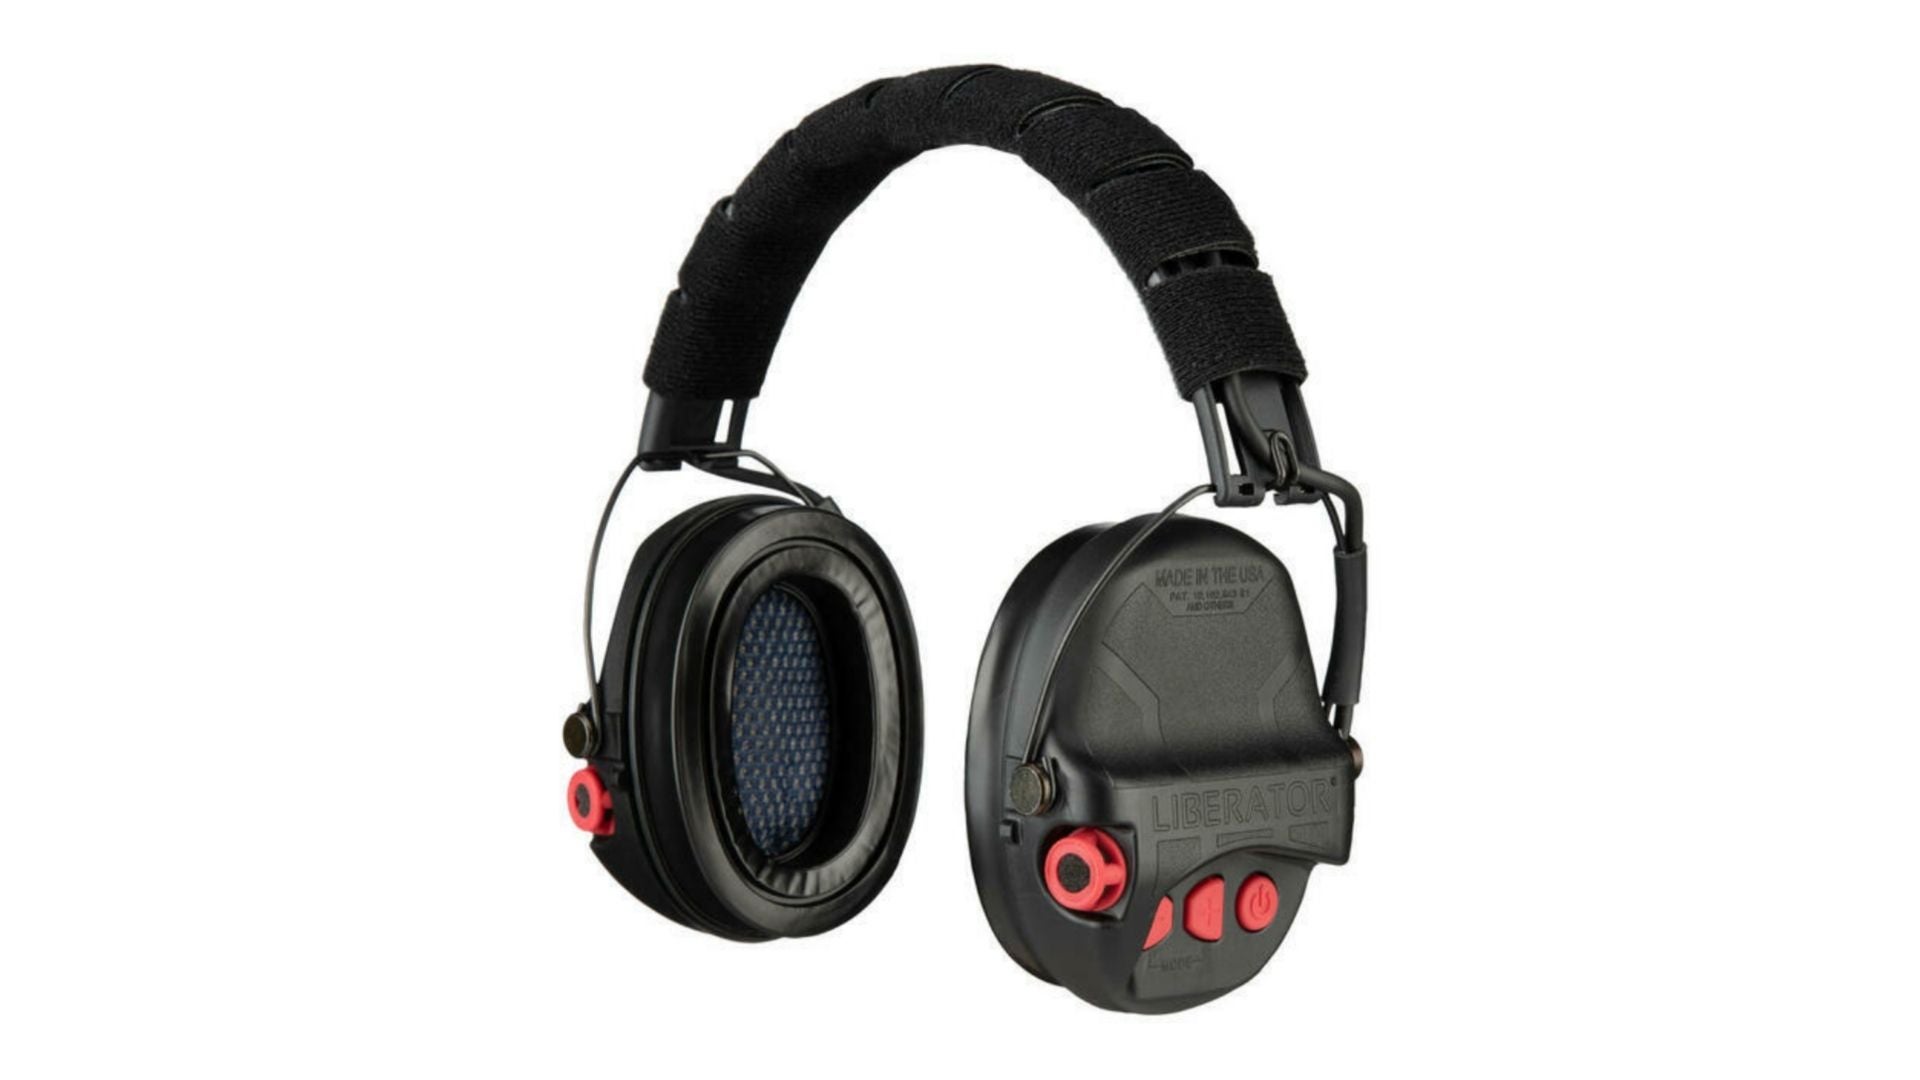 INDUSTRIAL EAR MUFFS NOISE REDUCTION Construction Shooting Range 